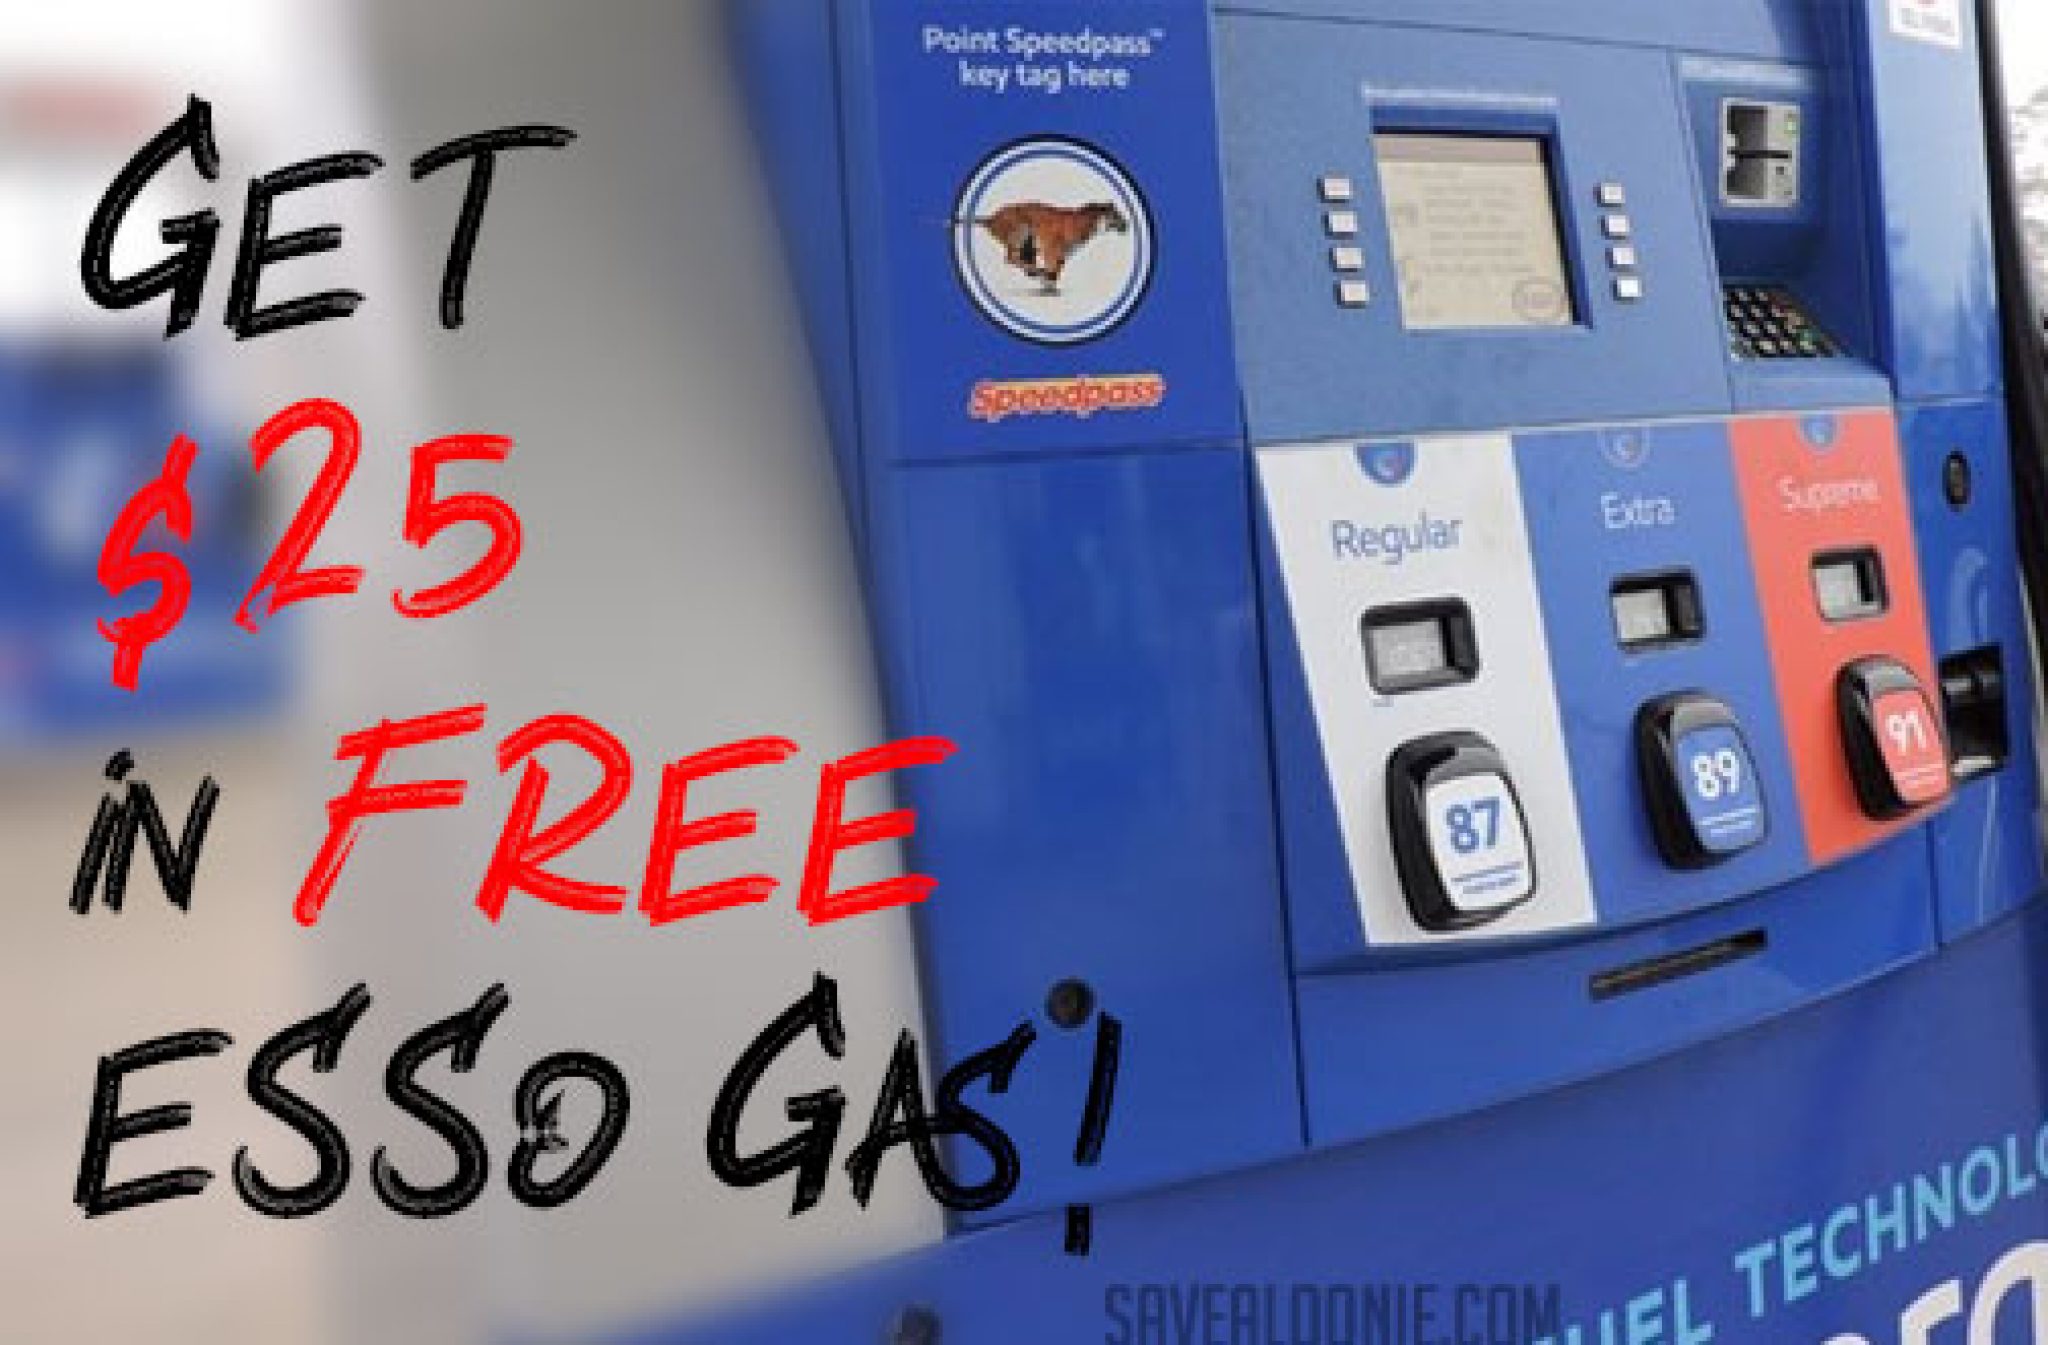 Esso Gas Offer Free 25 Gas Voucher For Frontline Workers — Deals